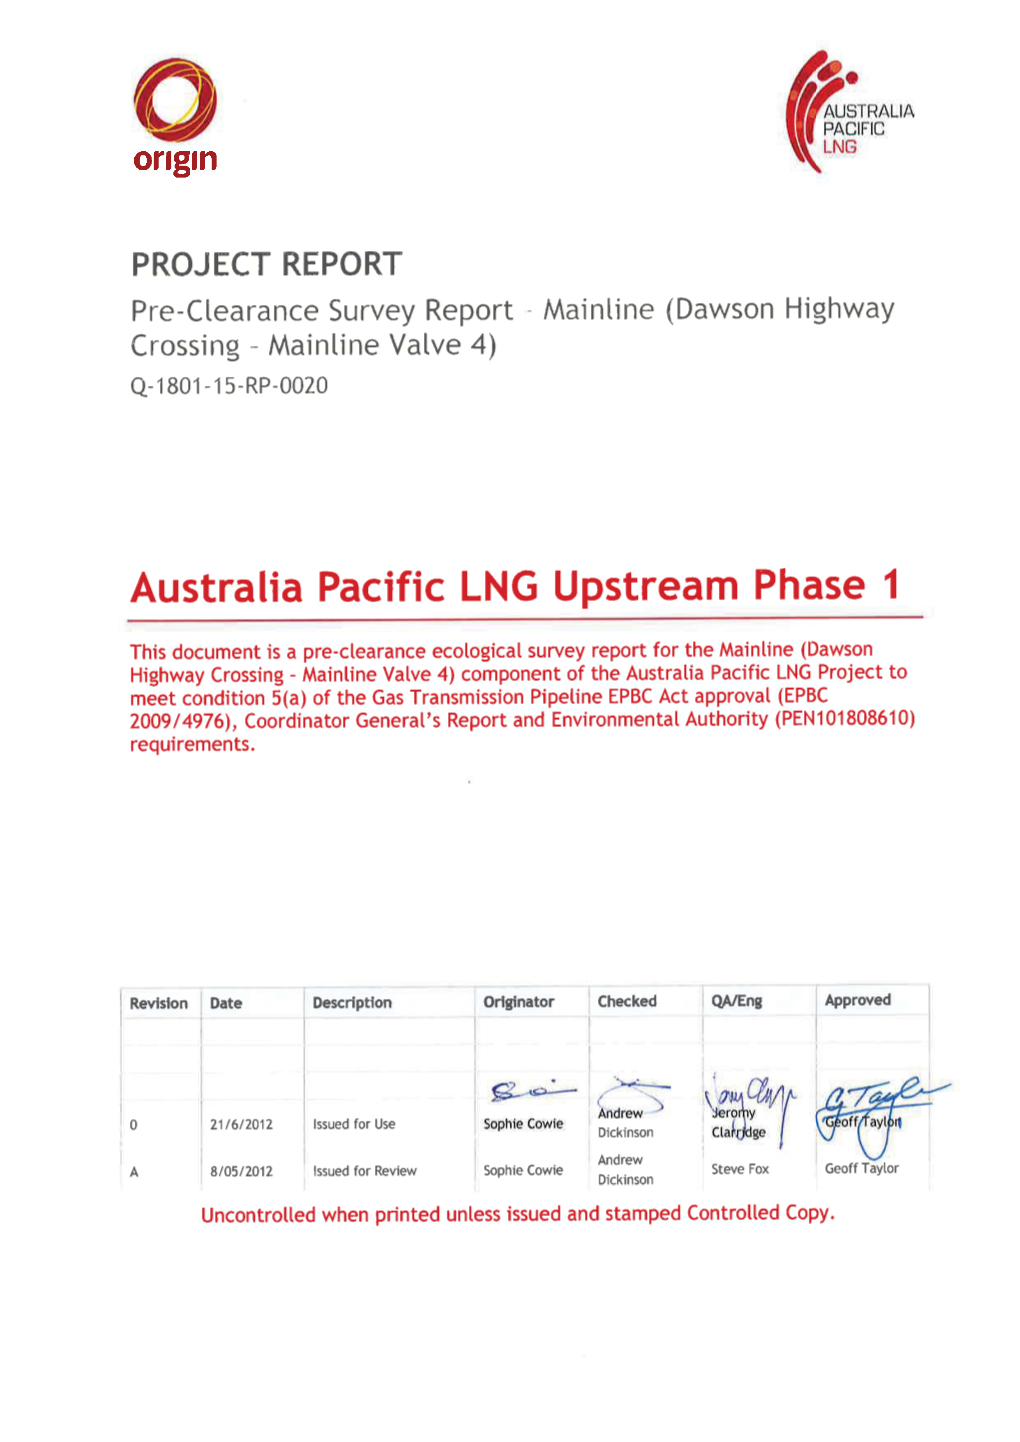 Release Notice This Document Is Available Through the Australia Pacific LNG Upstream Phase 1 Project Controlled Document System Teambinder™